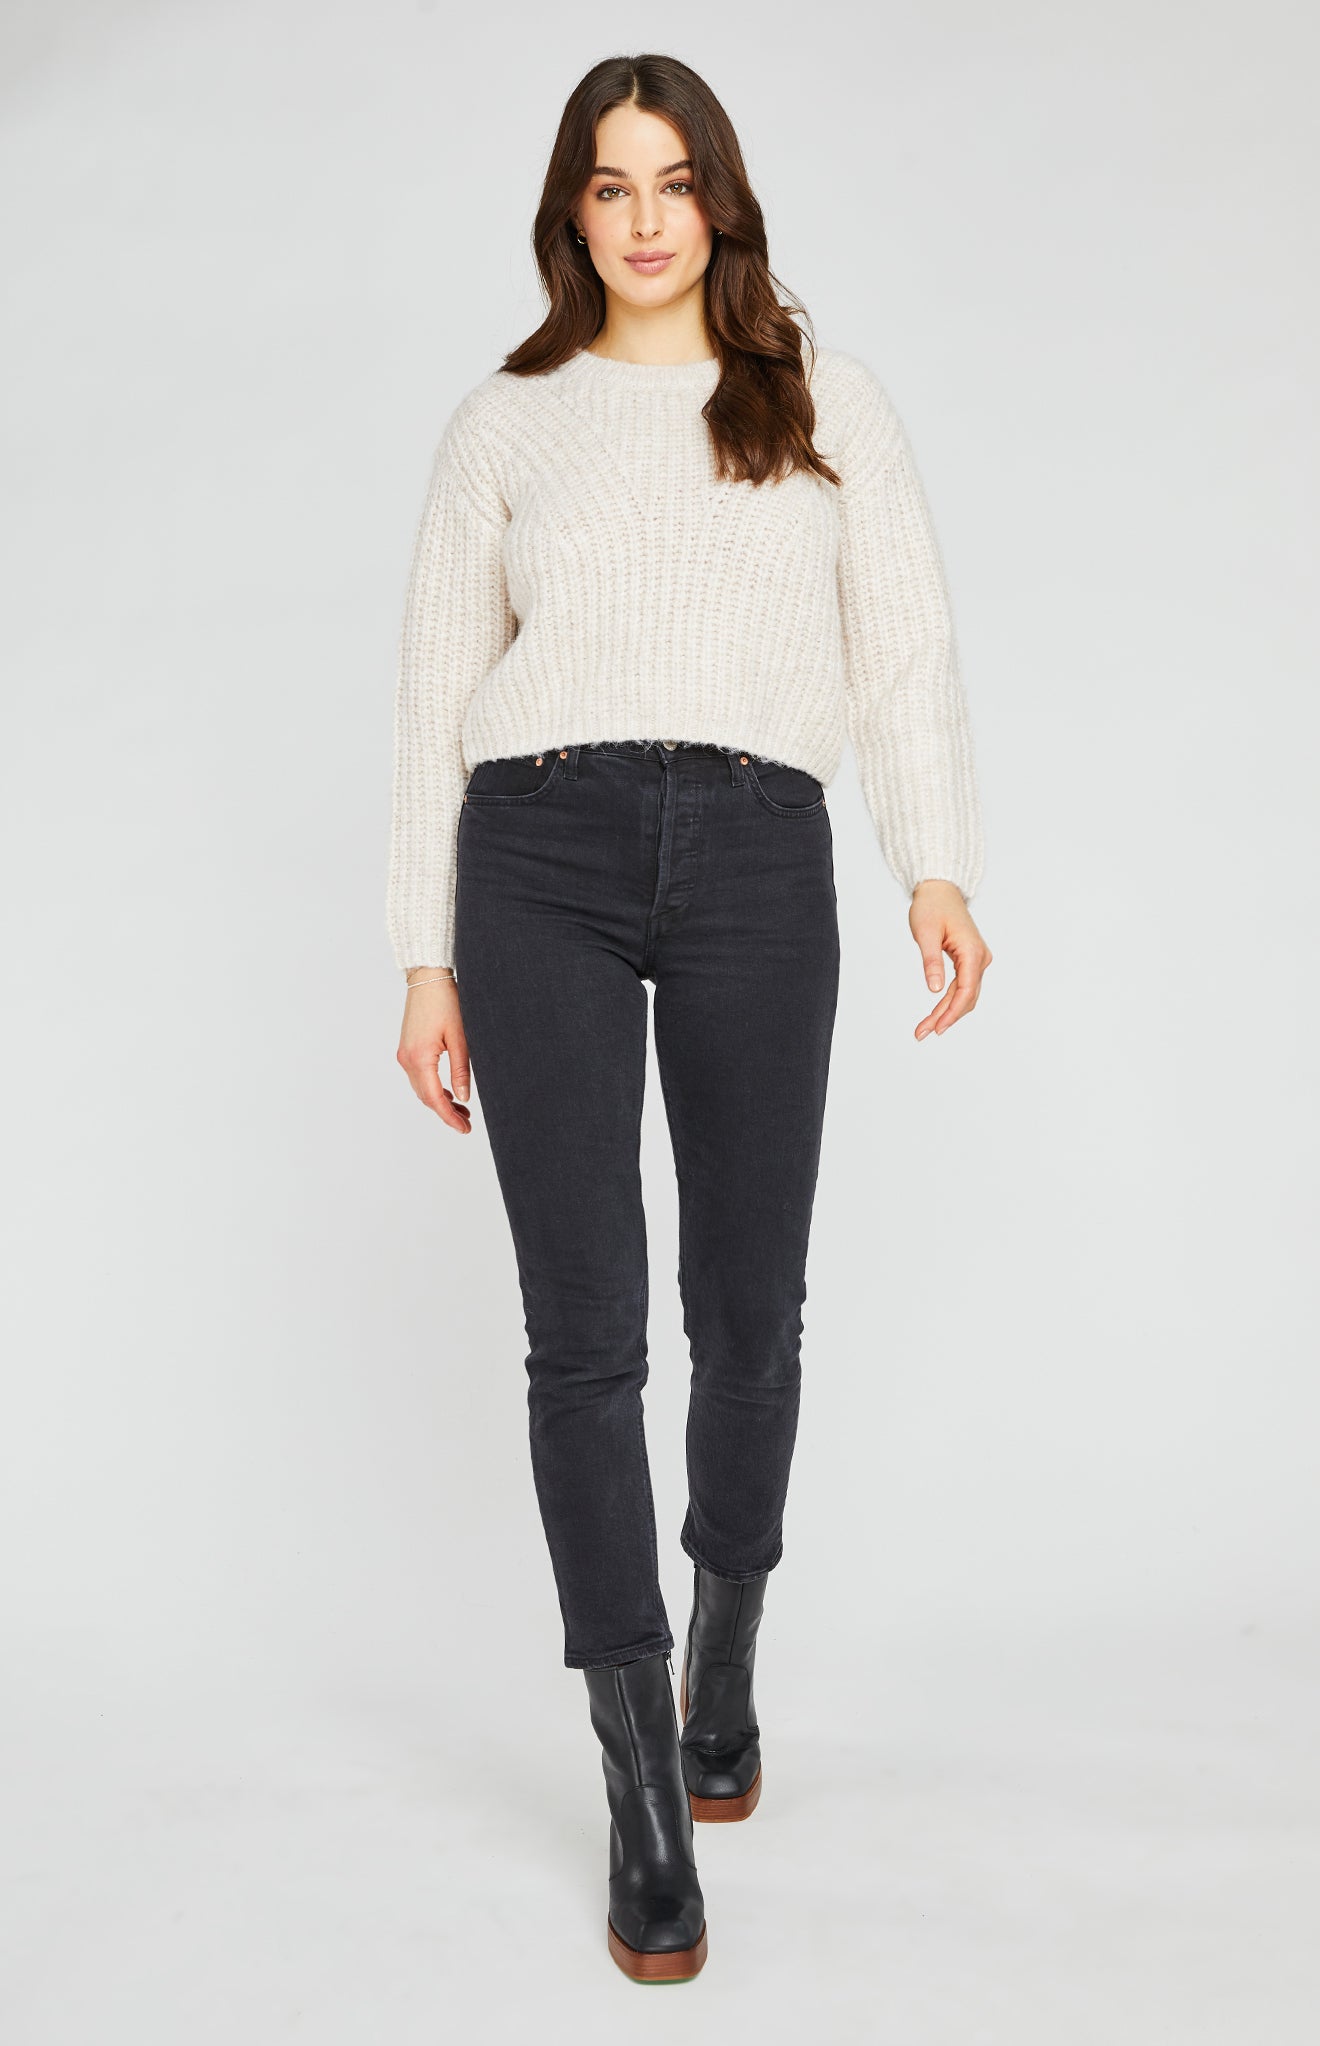 Carnaby Sweater